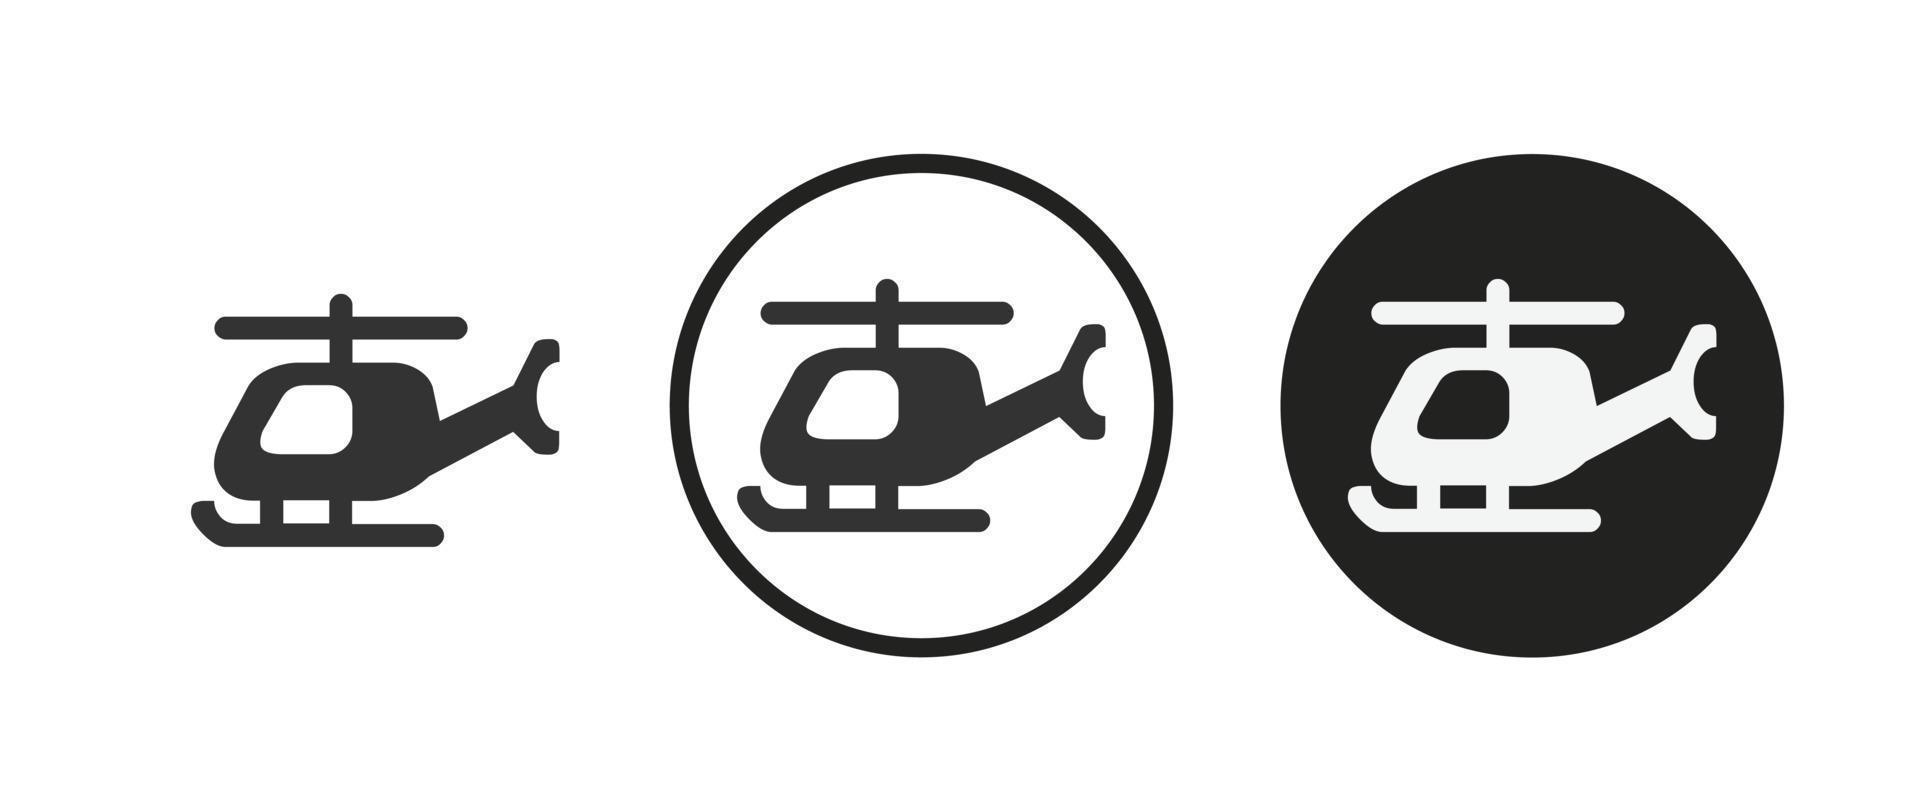 helicopter icon . web icon set . icons collection flat. Simple vector illustration.